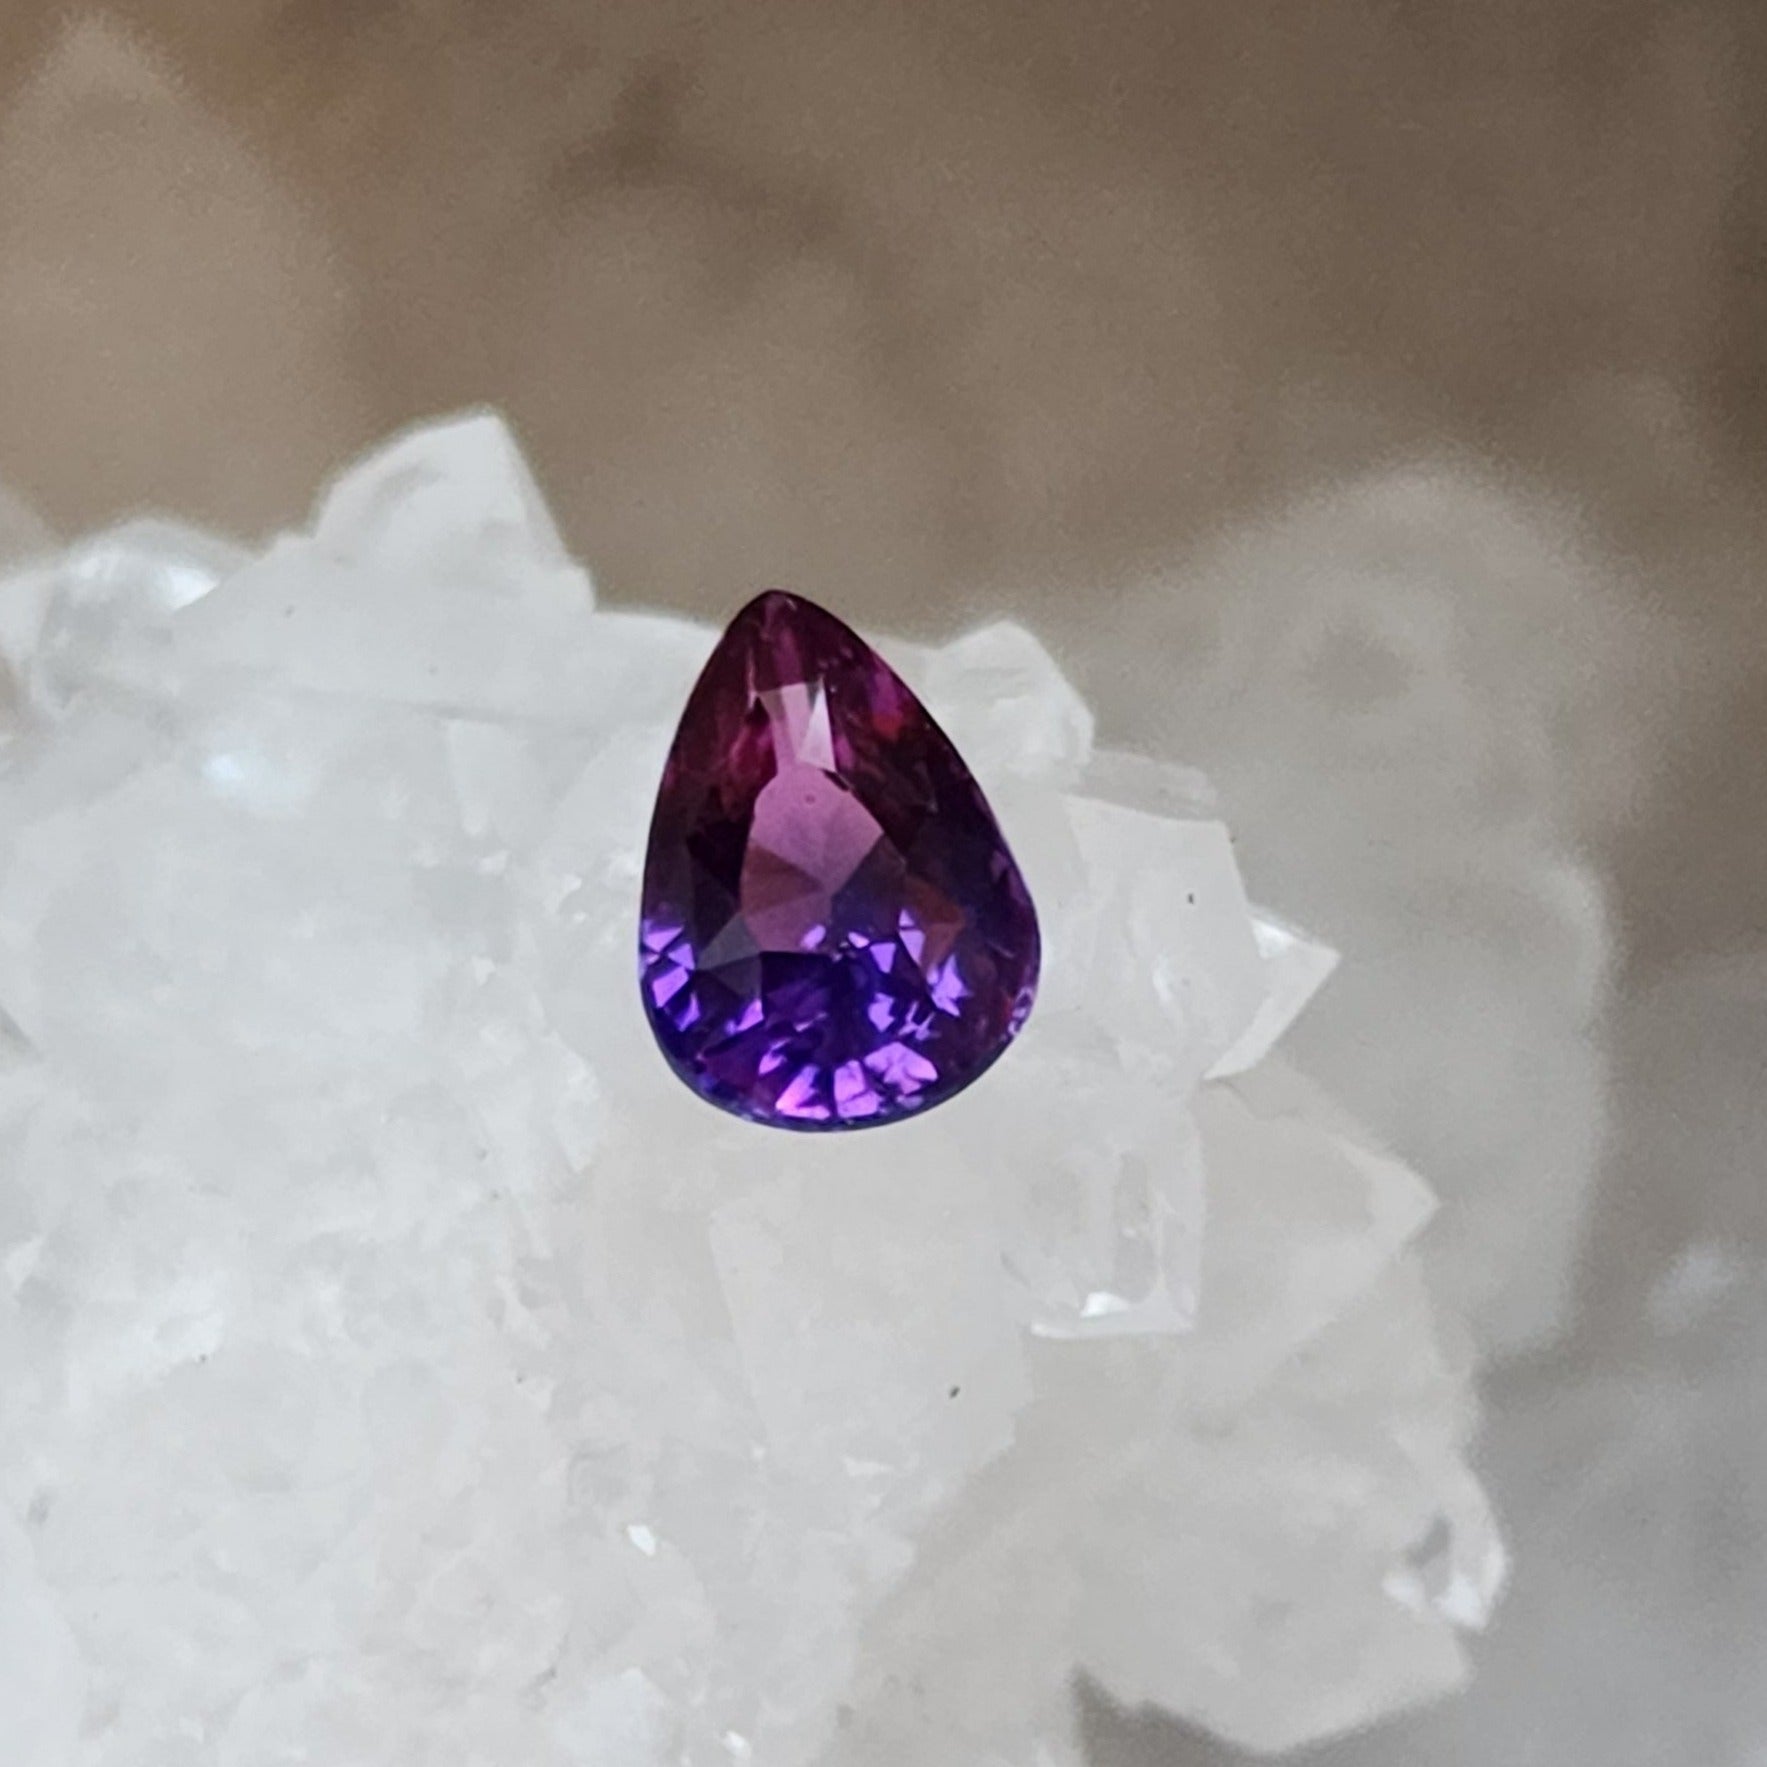 Madagascar Sapphire 2.05 CT Pink to Purple Bicolored Pear Cut